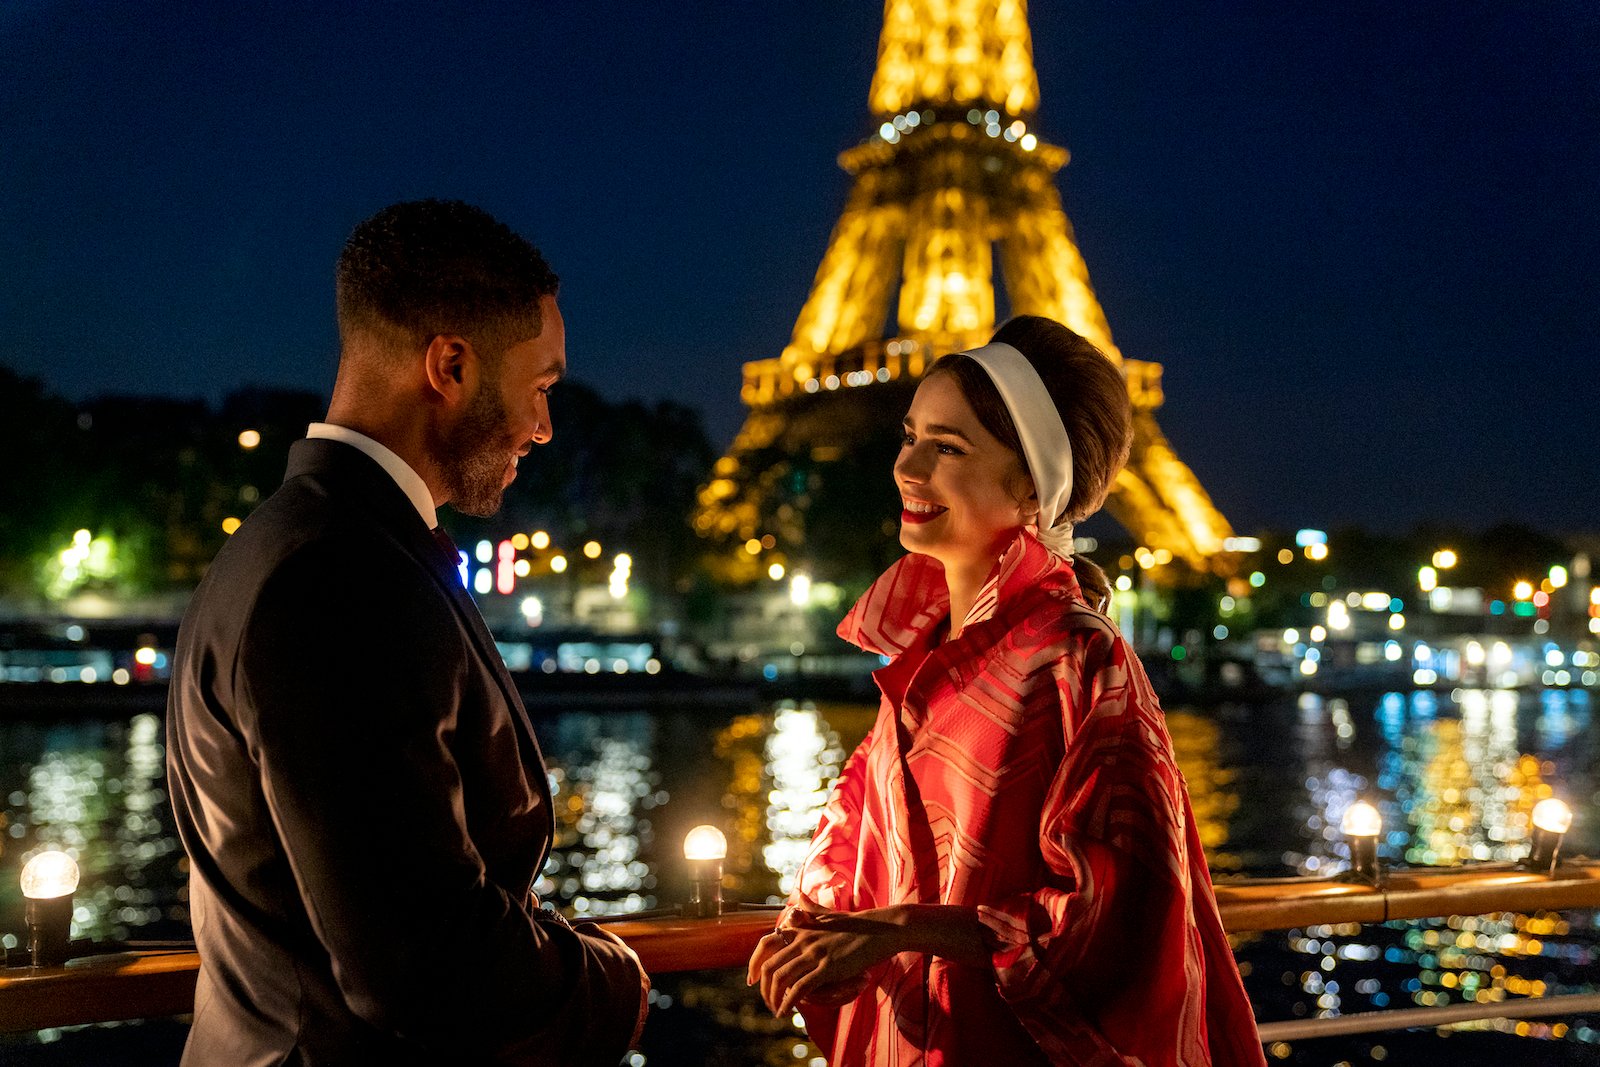 Emily in Paris Season 2 Release Date, Cast, Plot and More